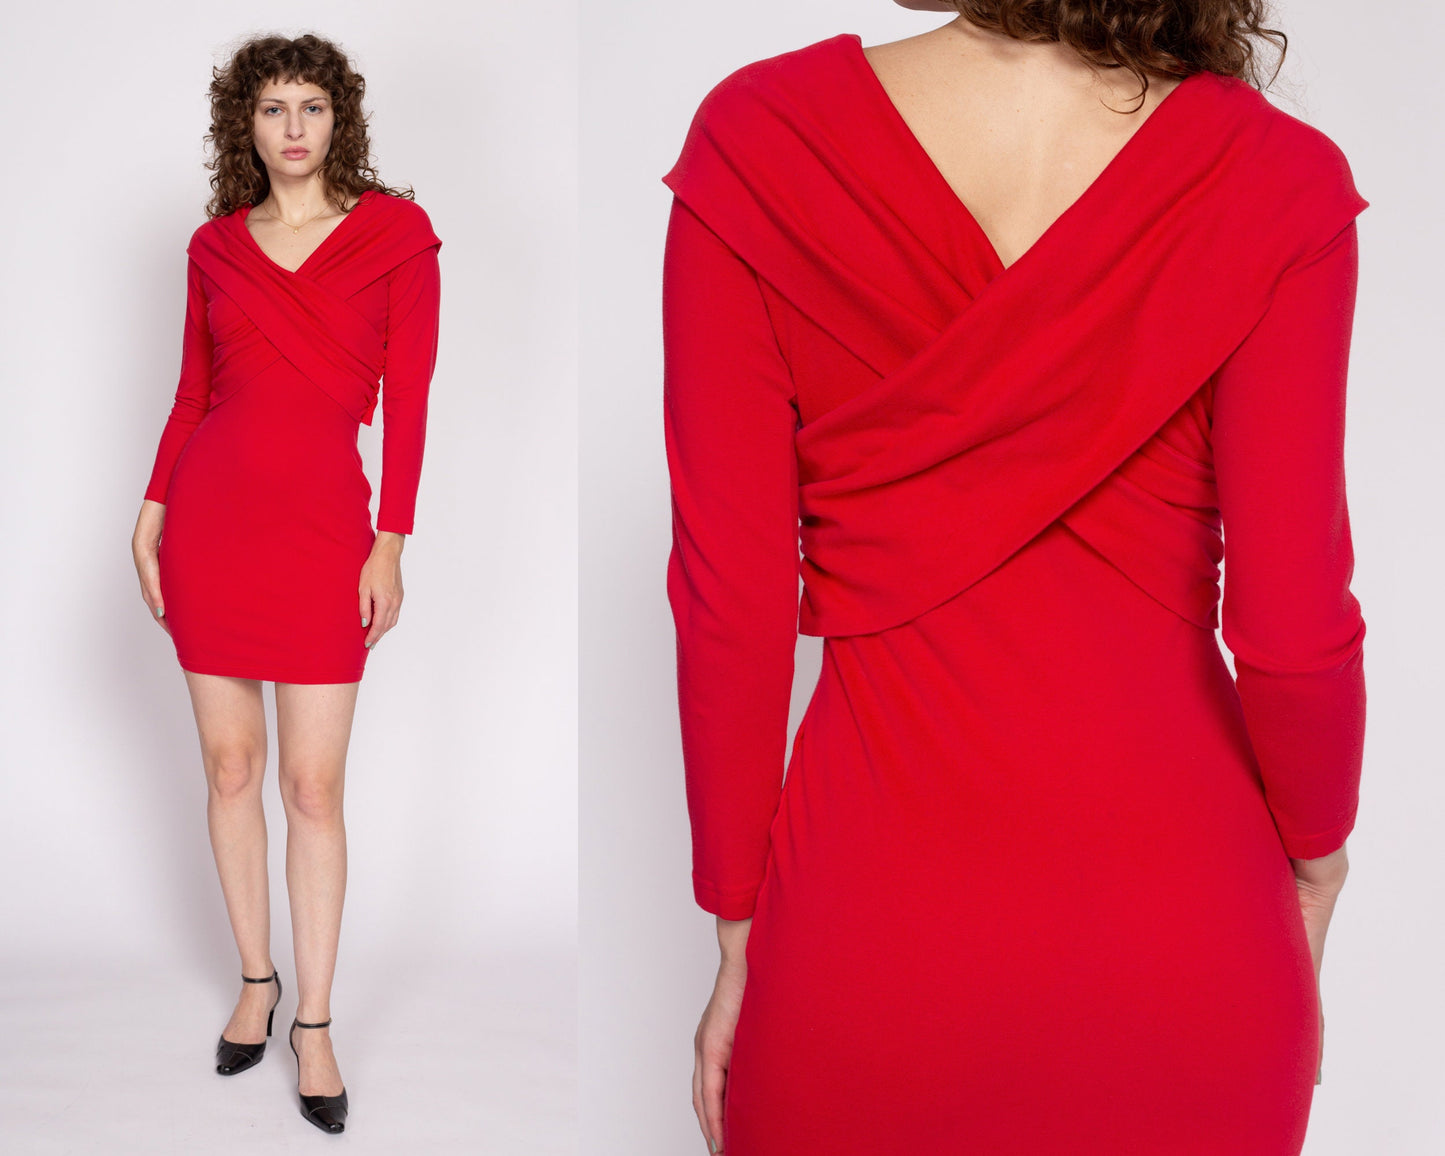 M| 80s Red Criss Cross Bodycon Dress - Medium | Vintage Long Sleeve Fitted Stretchy Mini Dress